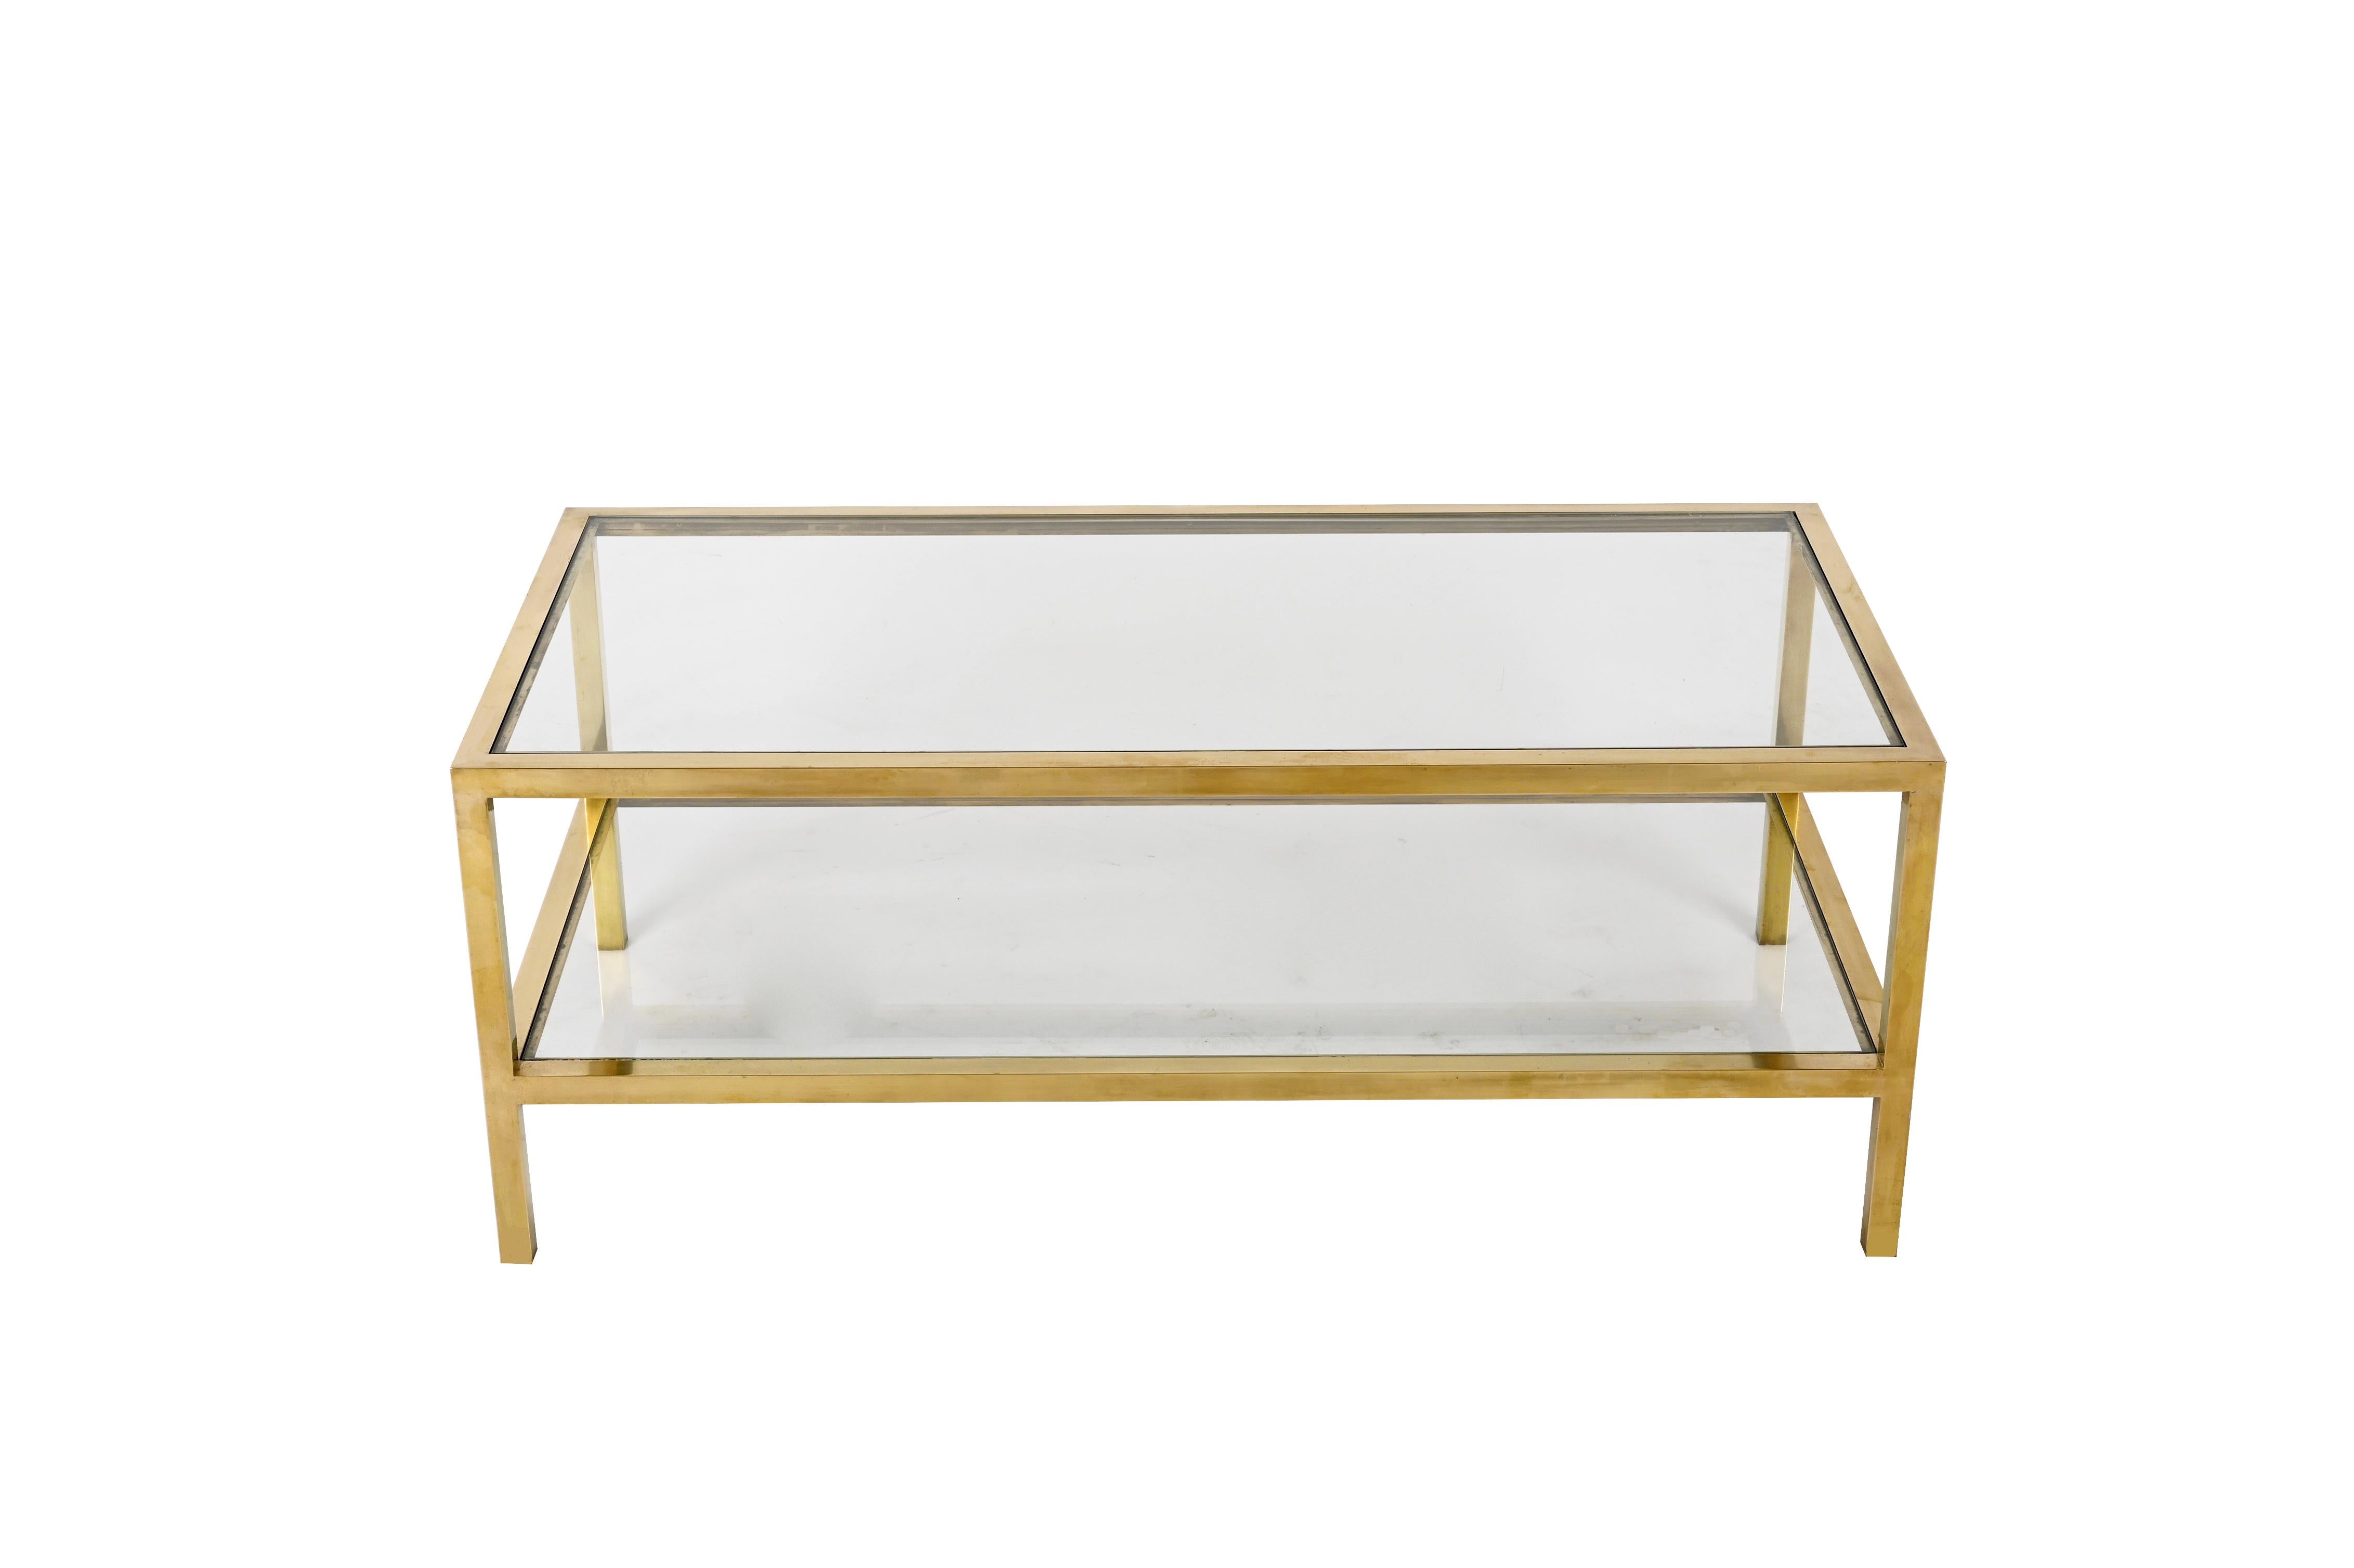 Amazing Mid-Century Modern rectangular coffee table with a brass structure and two-tiered glass tops. This fantastic piece was produced in Italy during the 1970s.

A luxurious item with a rectangular structure made of straight and clean lines with